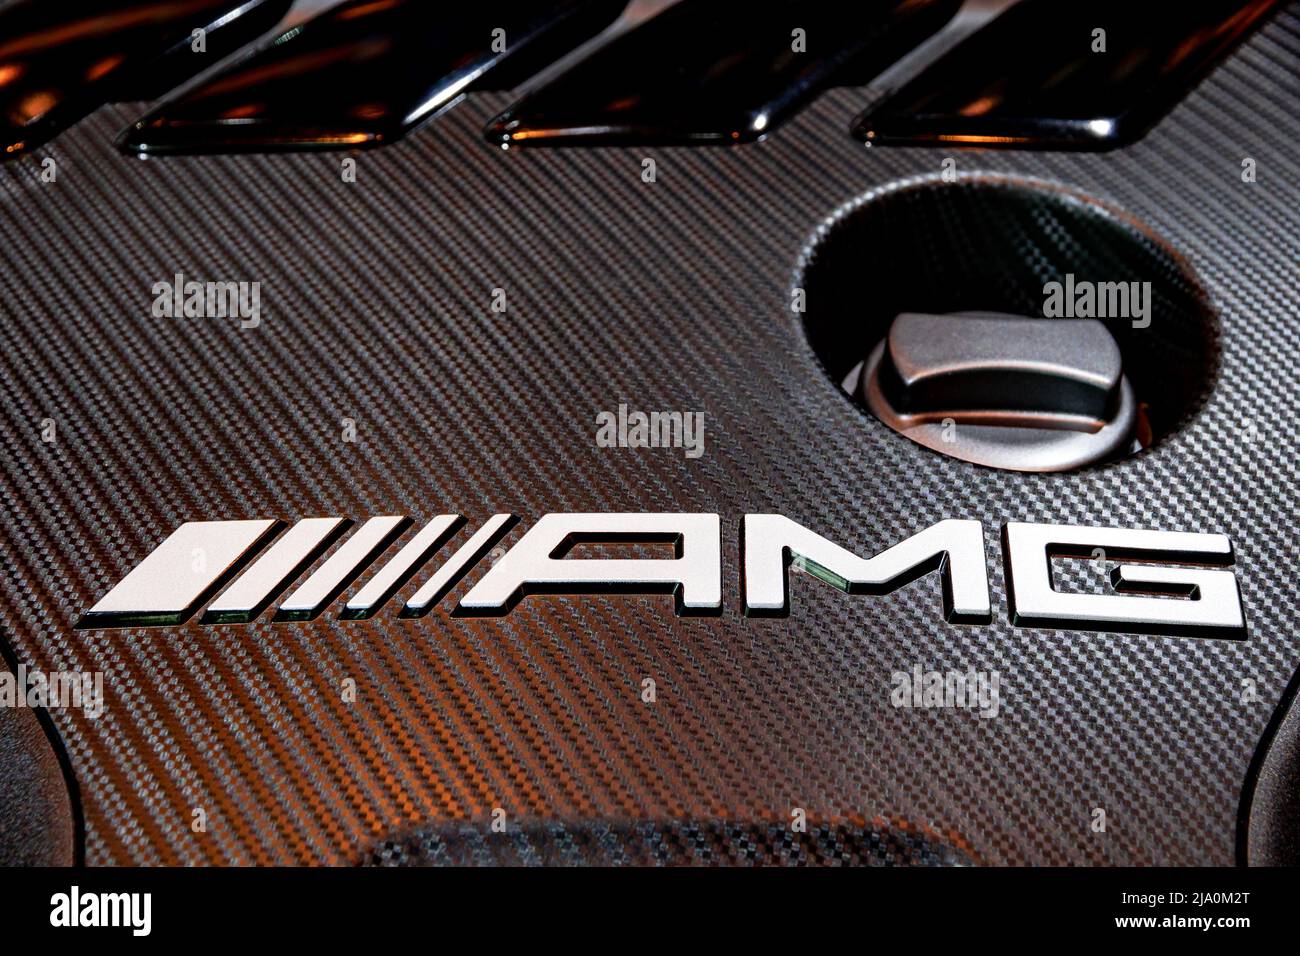 Mercedes-AMG engine logo on the engine cover of a sports car at the Frankfurt IAA Motor Show. Germany - September 11, 2019 Stock Photo